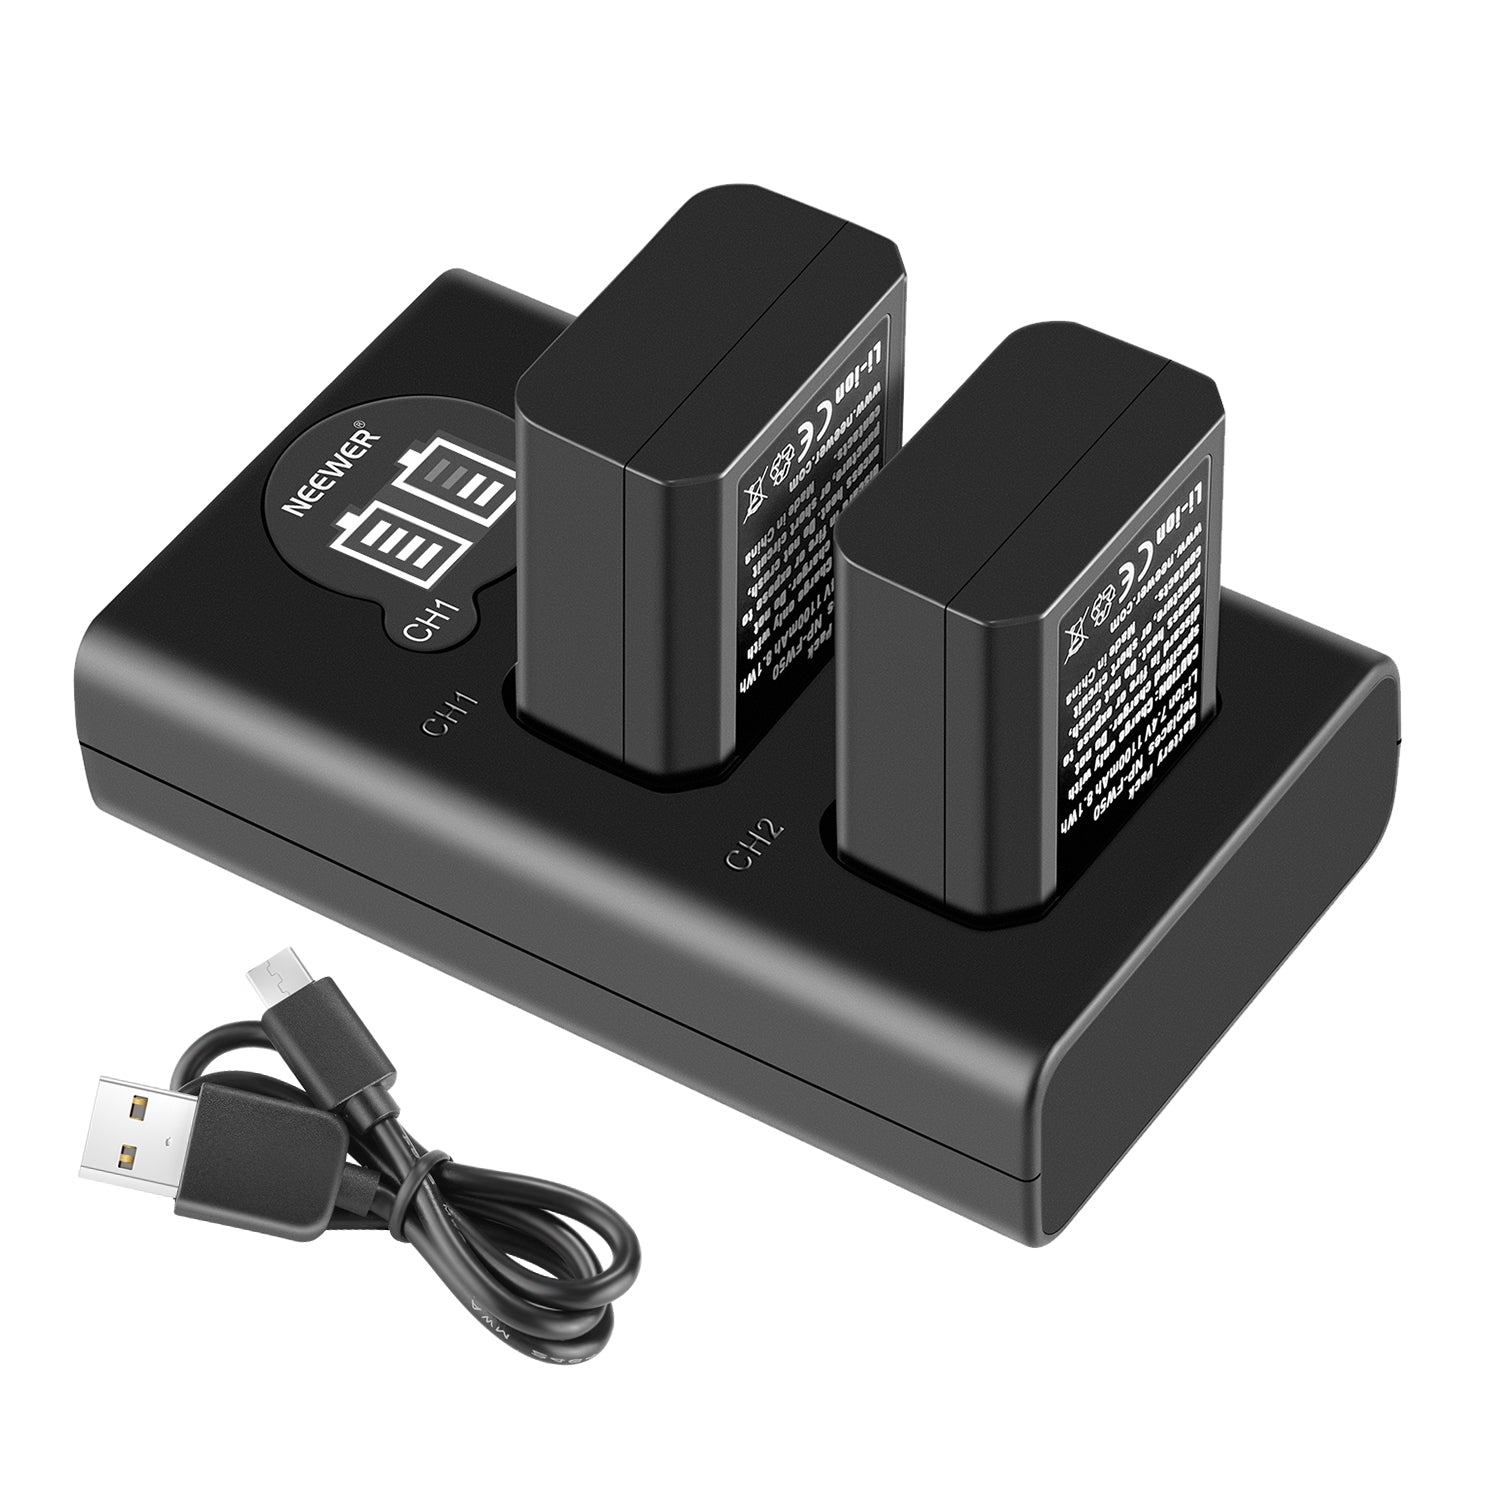 NEEWER 2-Pack NP-FW50 1100mAh Sony Replacement Battery Charger Set